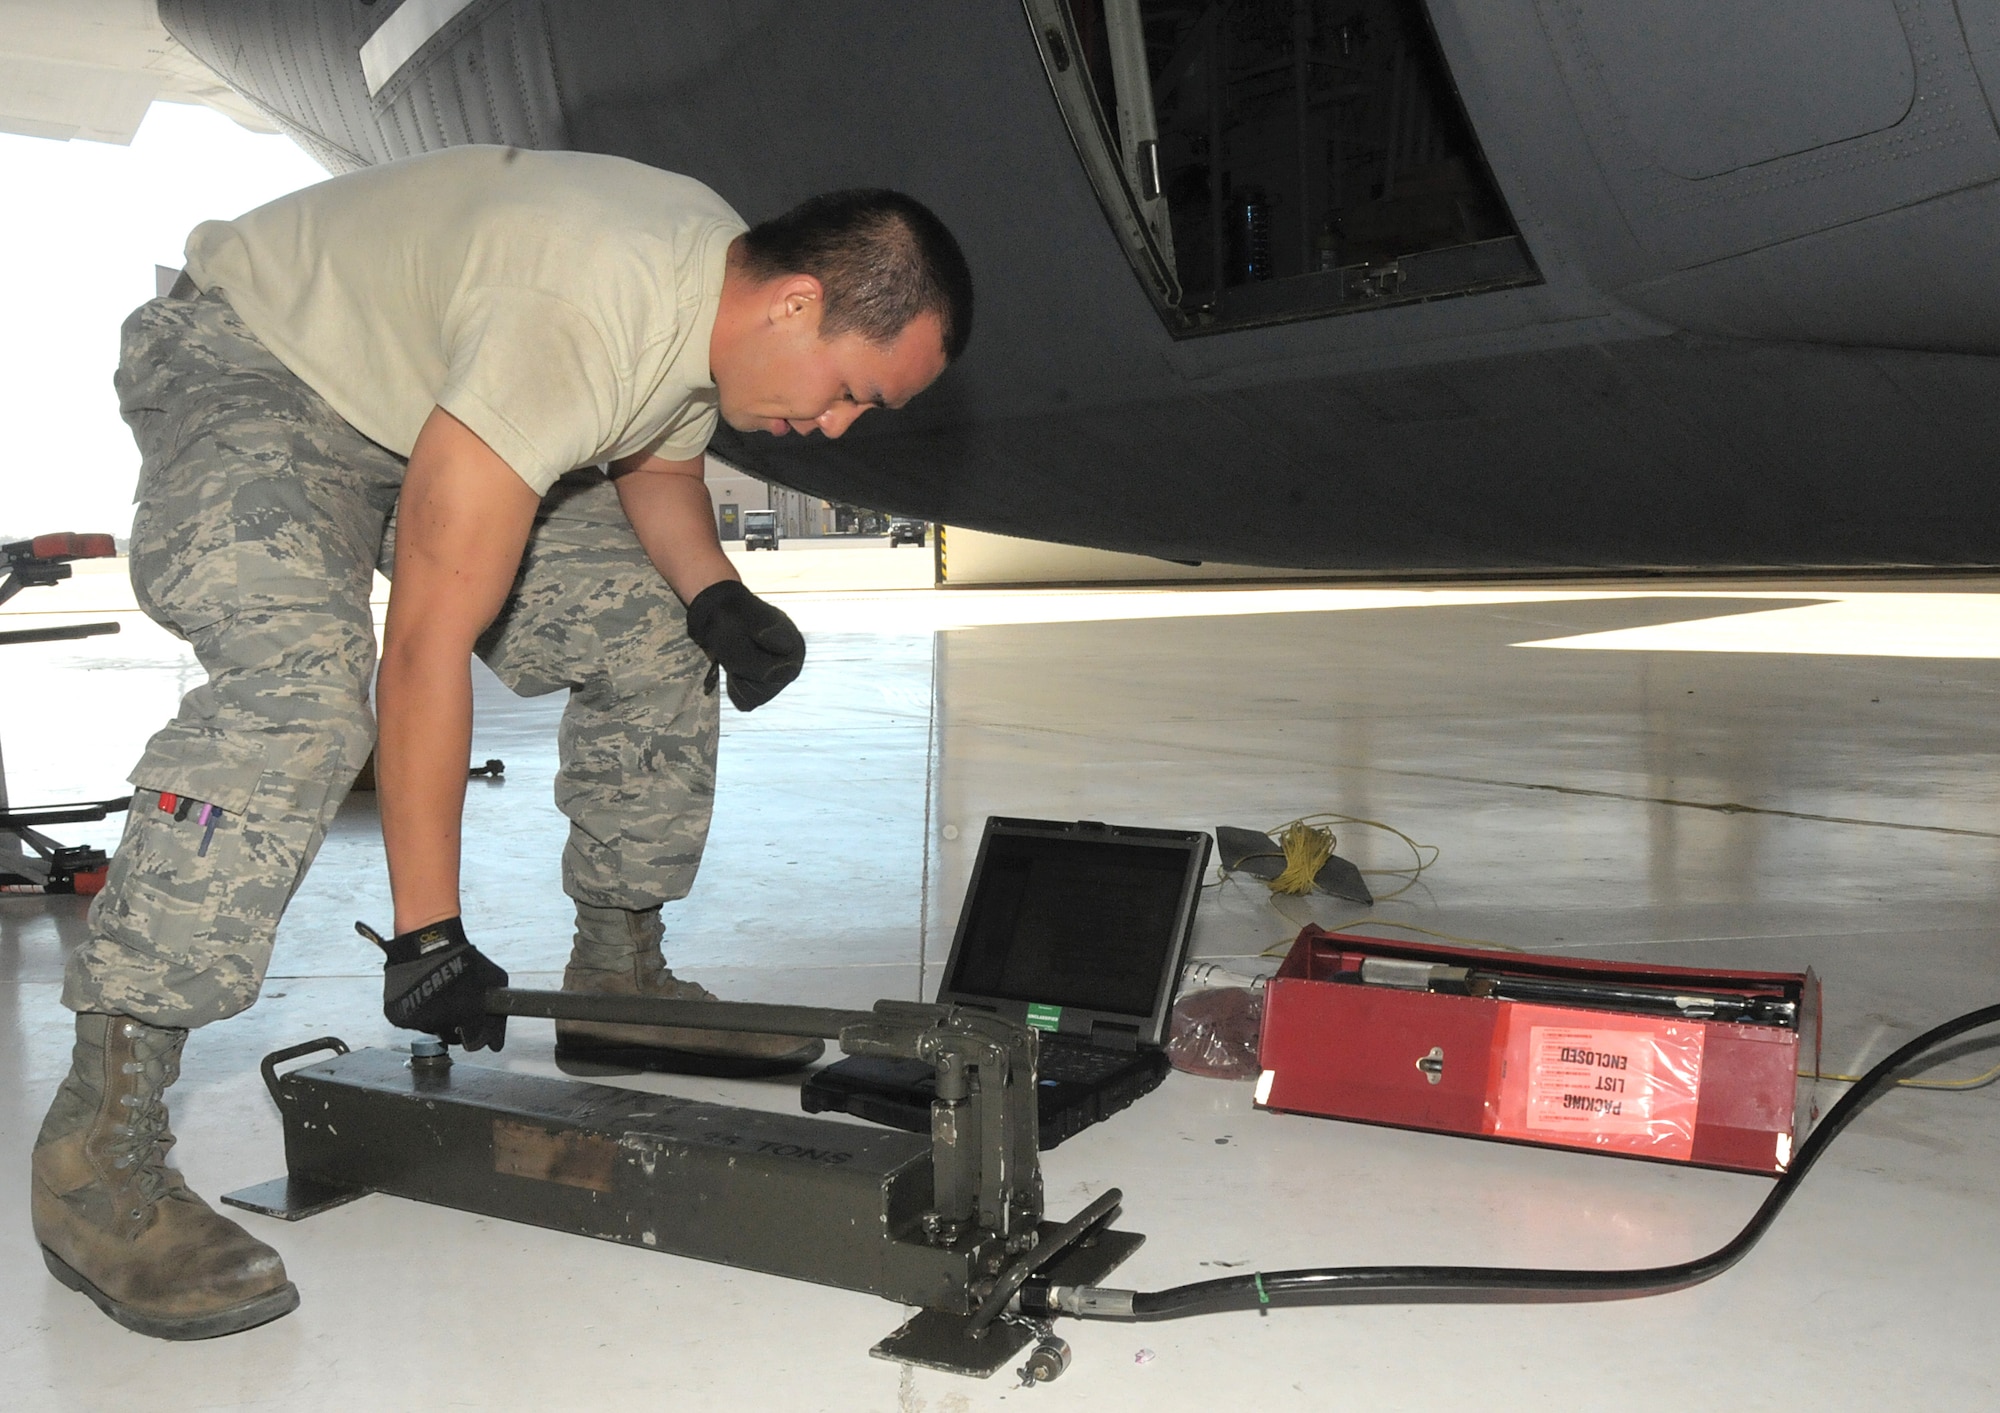 Airman 1st Class Joseph Ray A. Perez assists with changing a tire on a C130-J during a maintenance training exercise with other members of the 146th Aerospace Maintenance Squadron at the 146th Airlift Wing Port Hueneme, Calif. on October 2, 2011. Airman 1st Class Perez is the 146th Airlift Wing's Featured Airman of the Month for October, 2011.